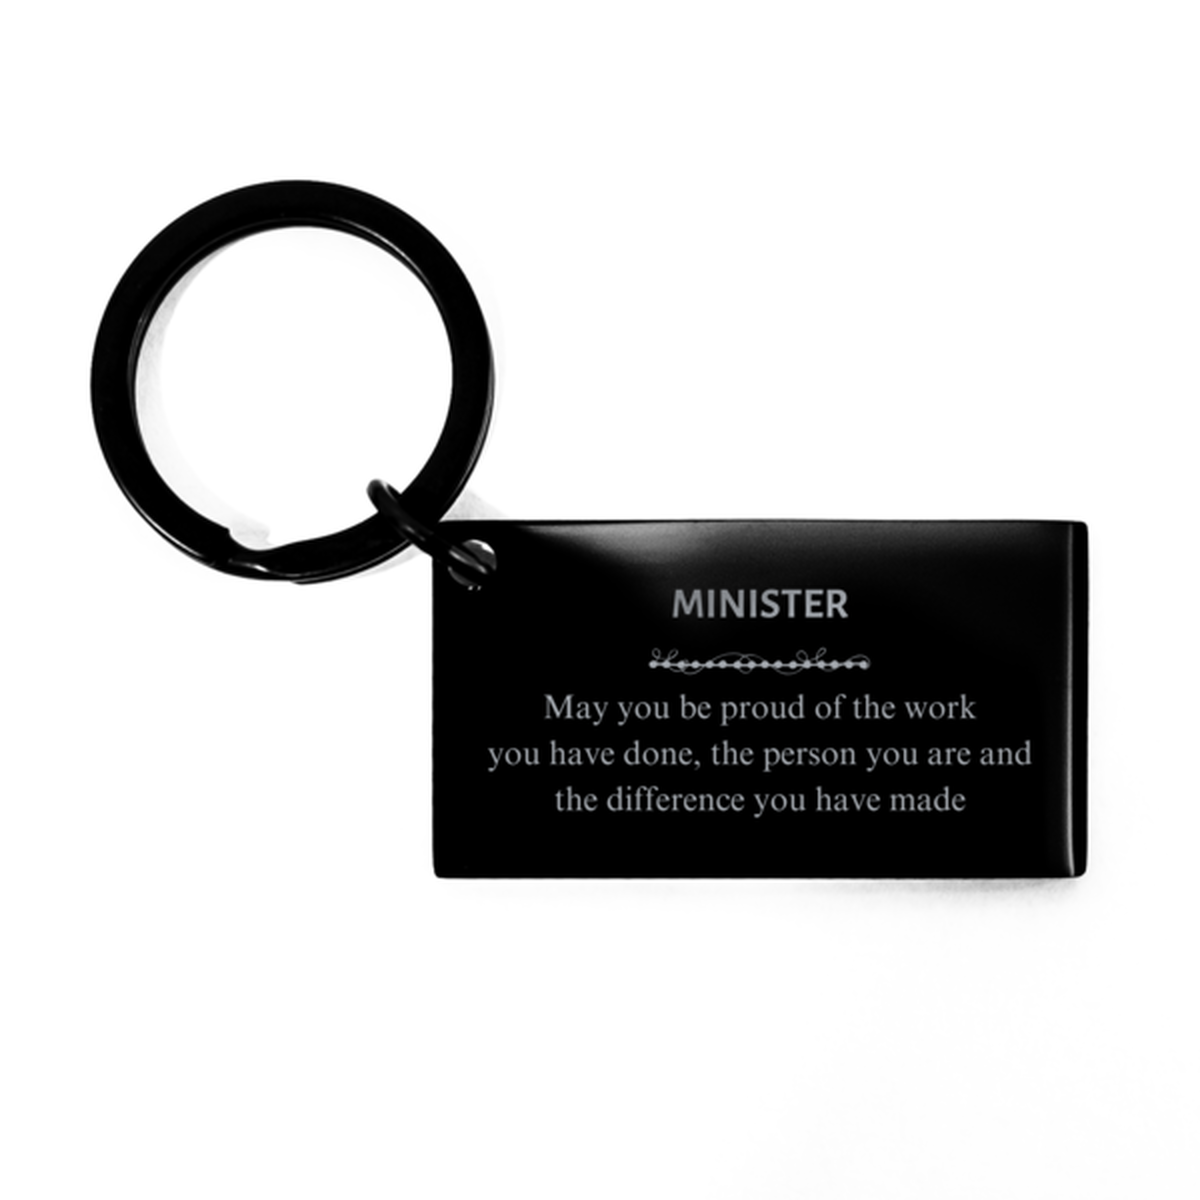 Orthodontist May you be proud of the work you have done, Retirement Minister Keychain for Colleague Appreciation Gifts Amazing for Minister